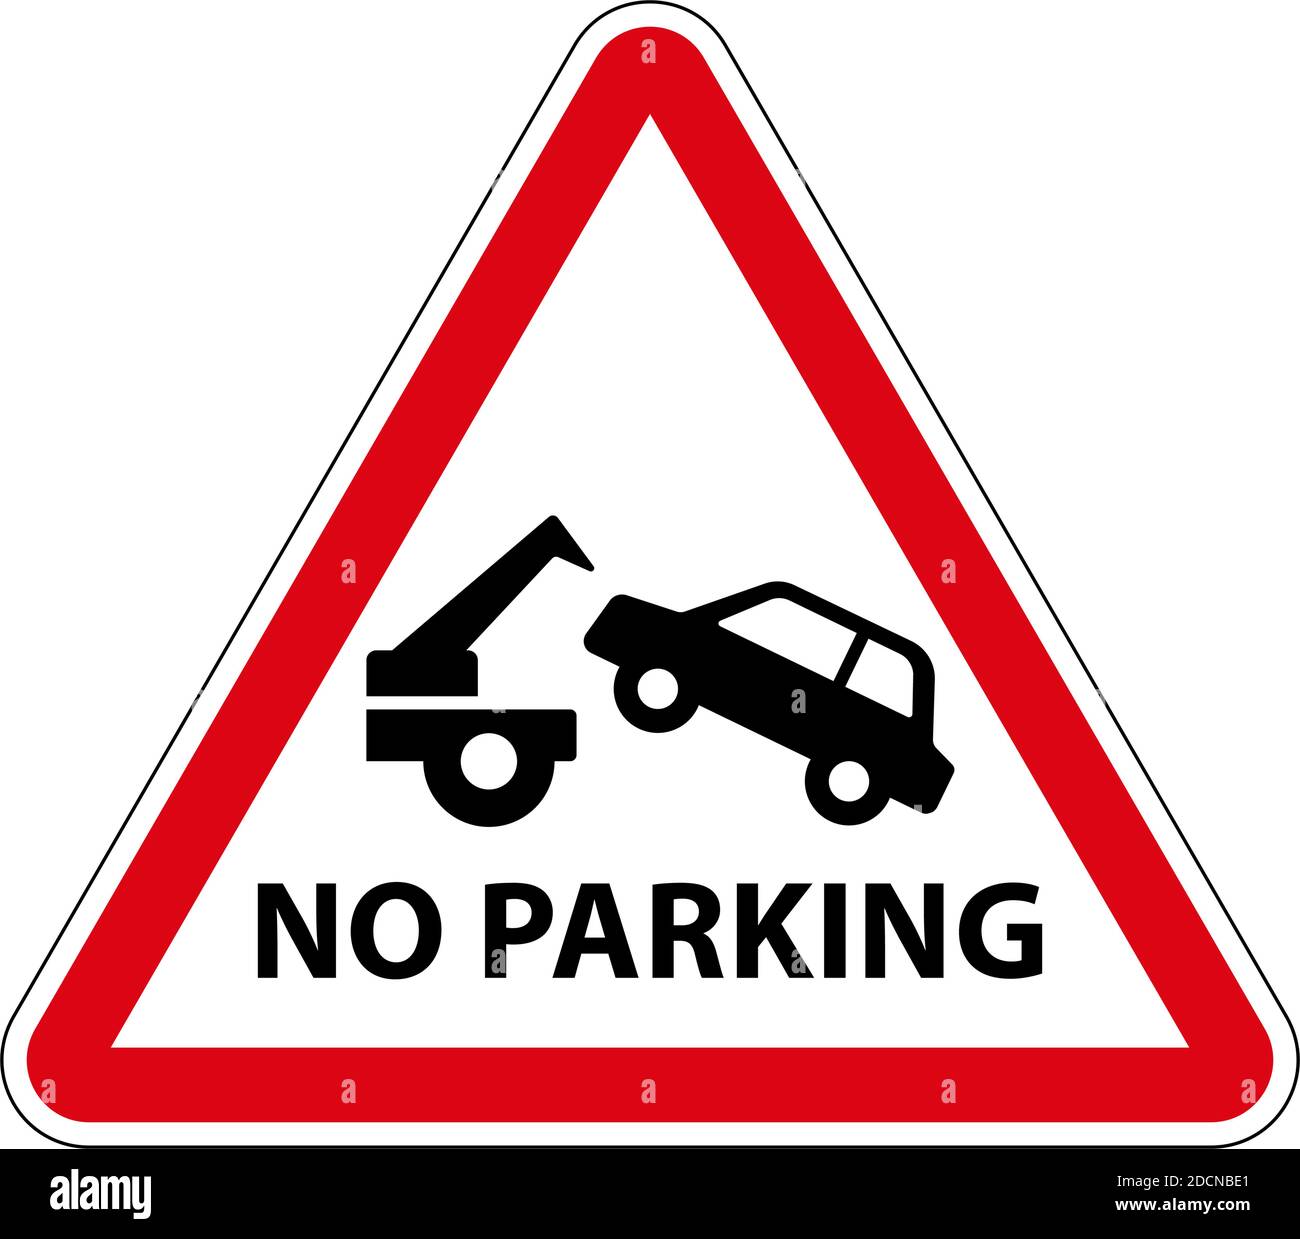 No parking car tow warning sign with triangular shape and red frame Stock Vector